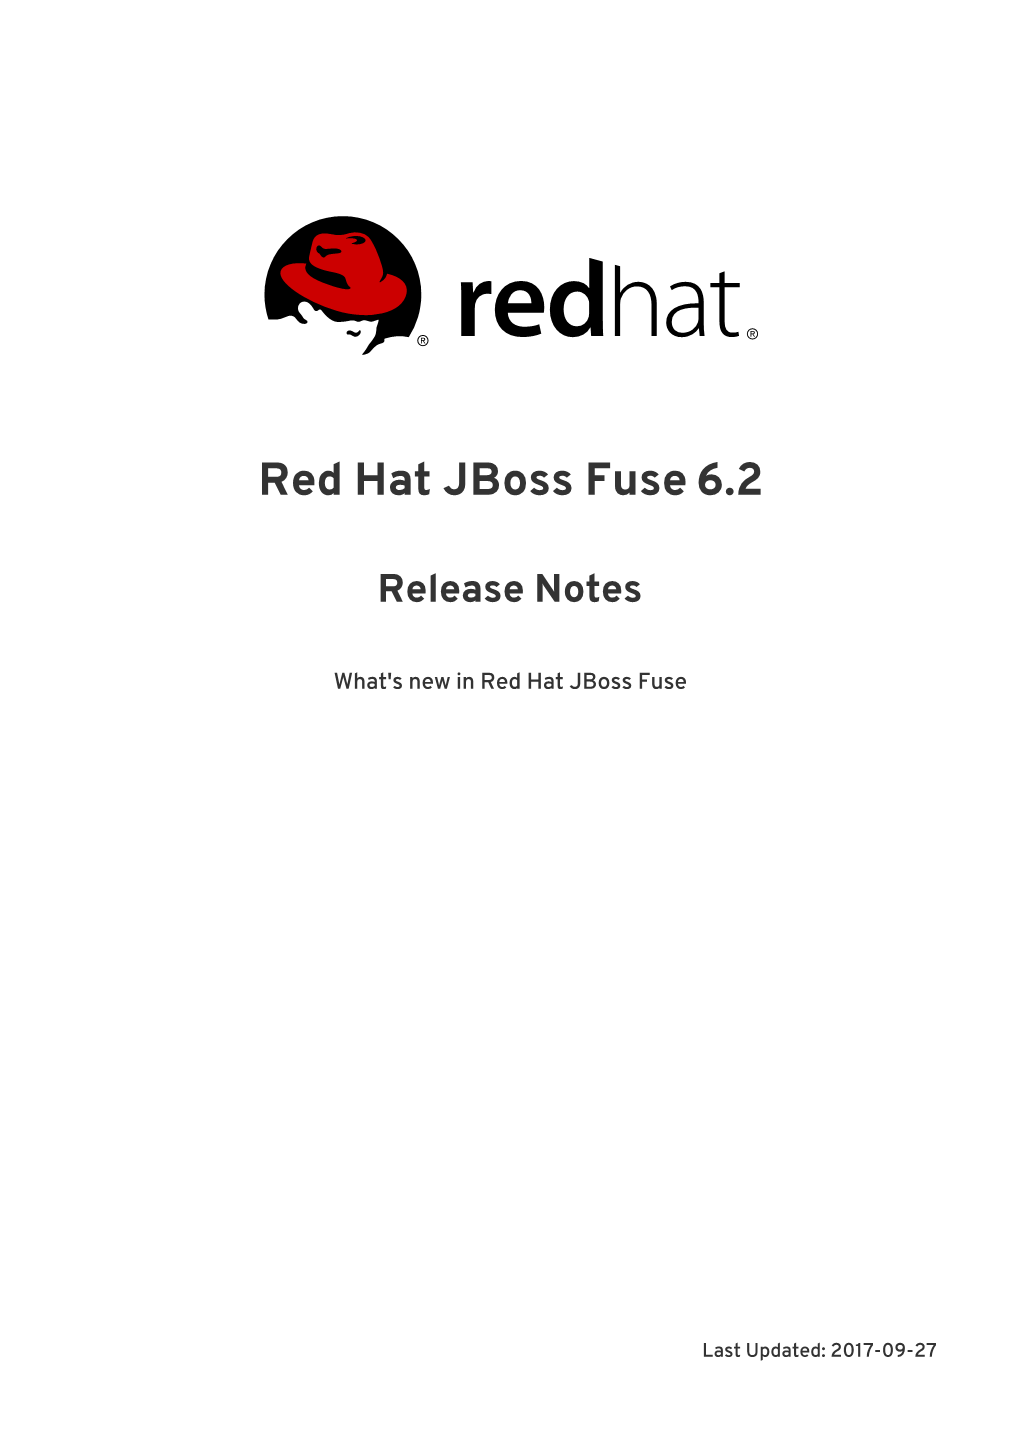 Red Hat Jboss Fuse 6.2 Release Notes